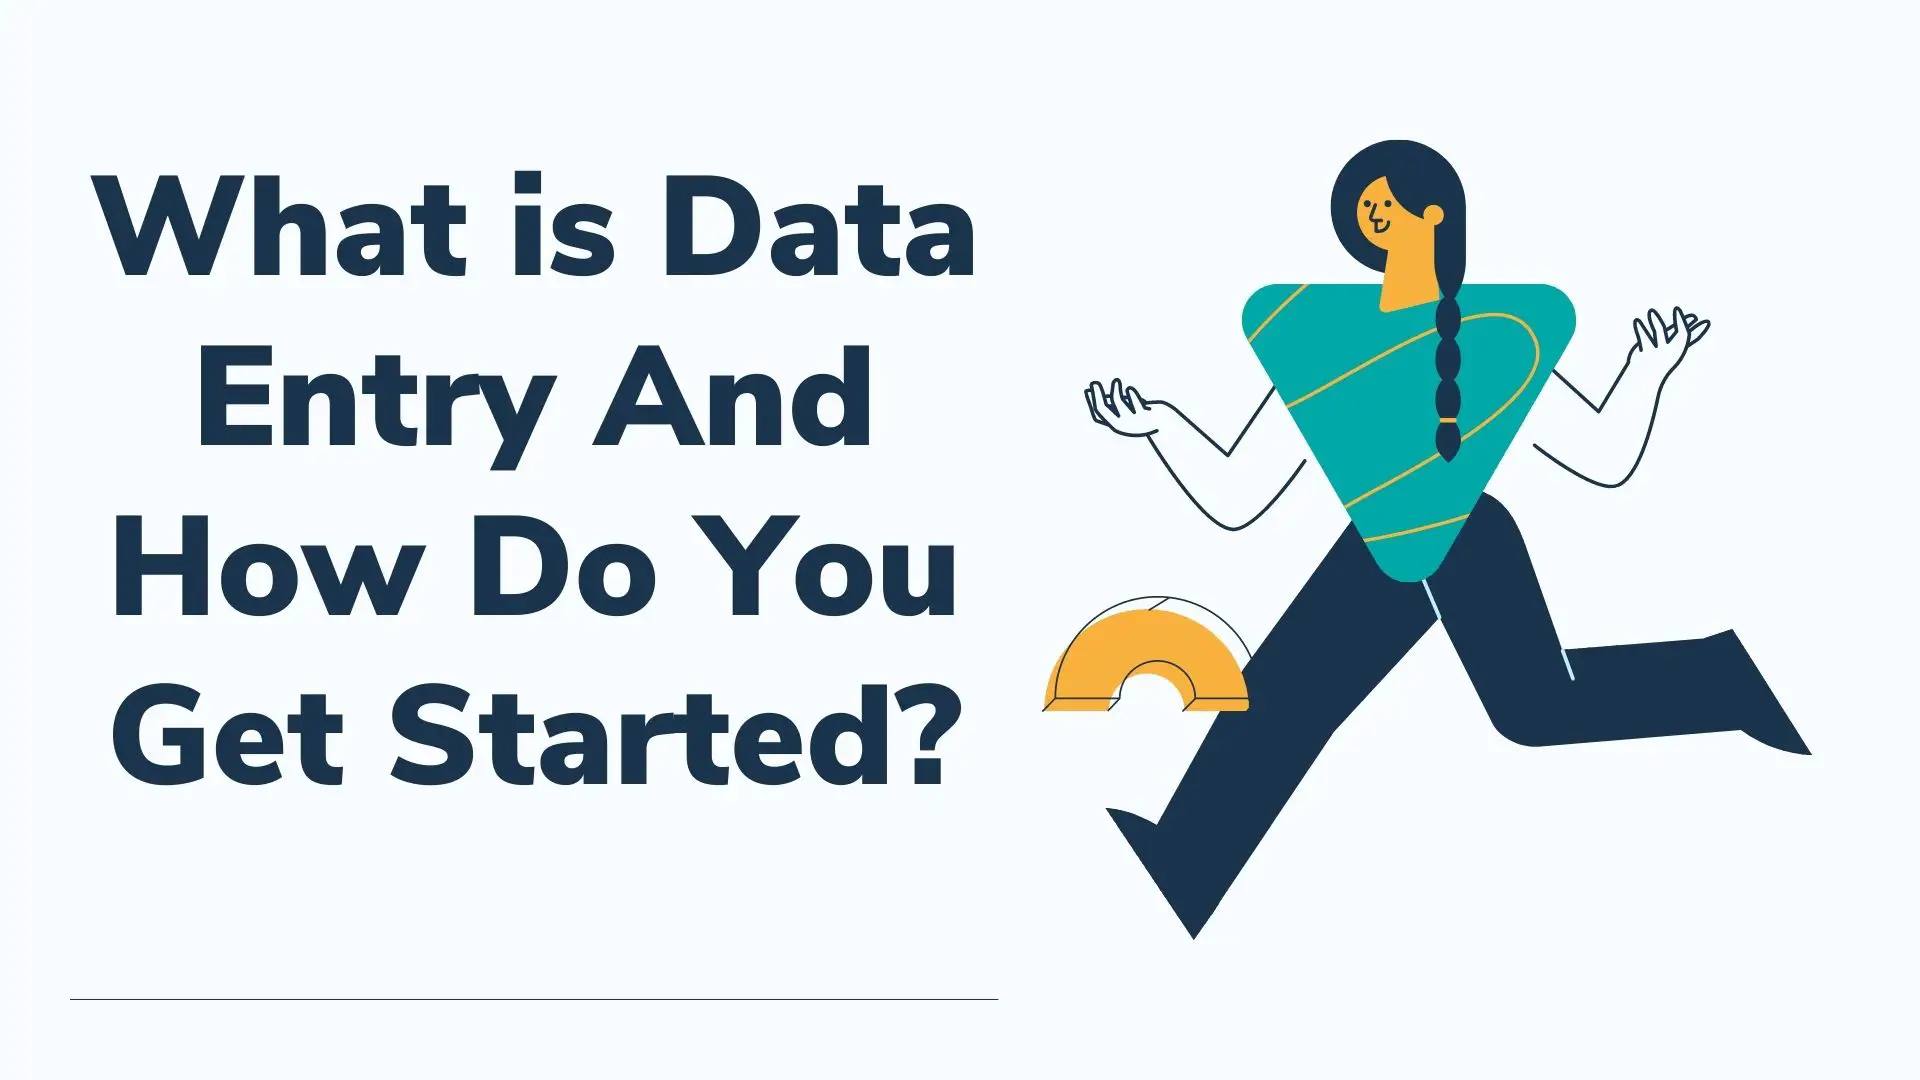 What is Data Entry And How Do You Get Started?